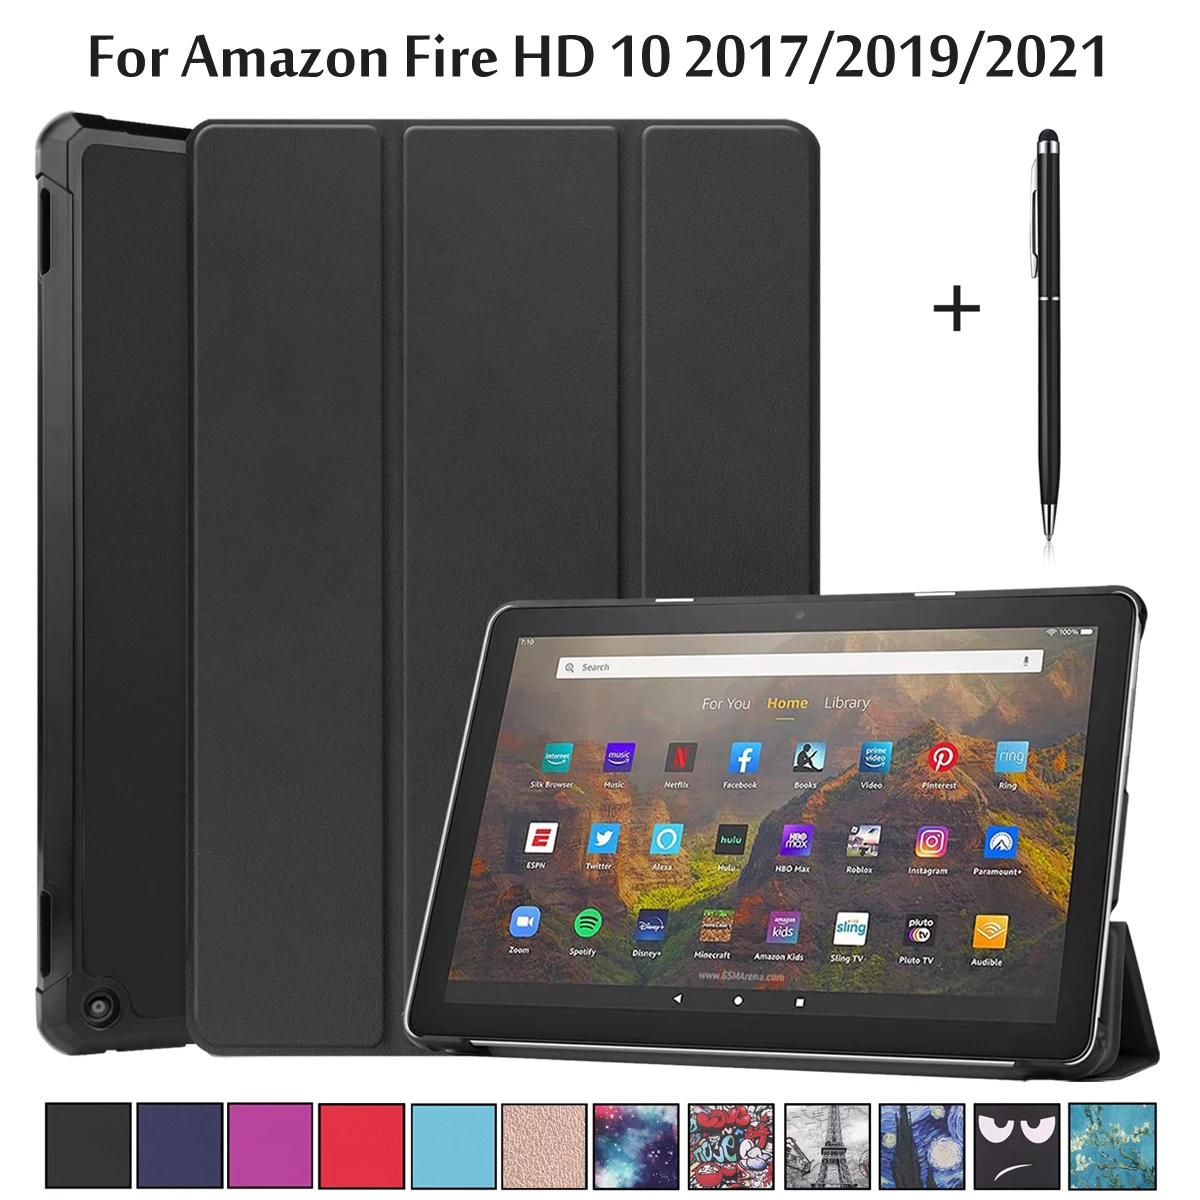 Case For Amazon Fire HD 10 Plus 2021 / 2017 / 2019 / 2020 10.1 inch Tablet Auto Sleep Ultra Slim Magnetic Stand PU Leather Cover